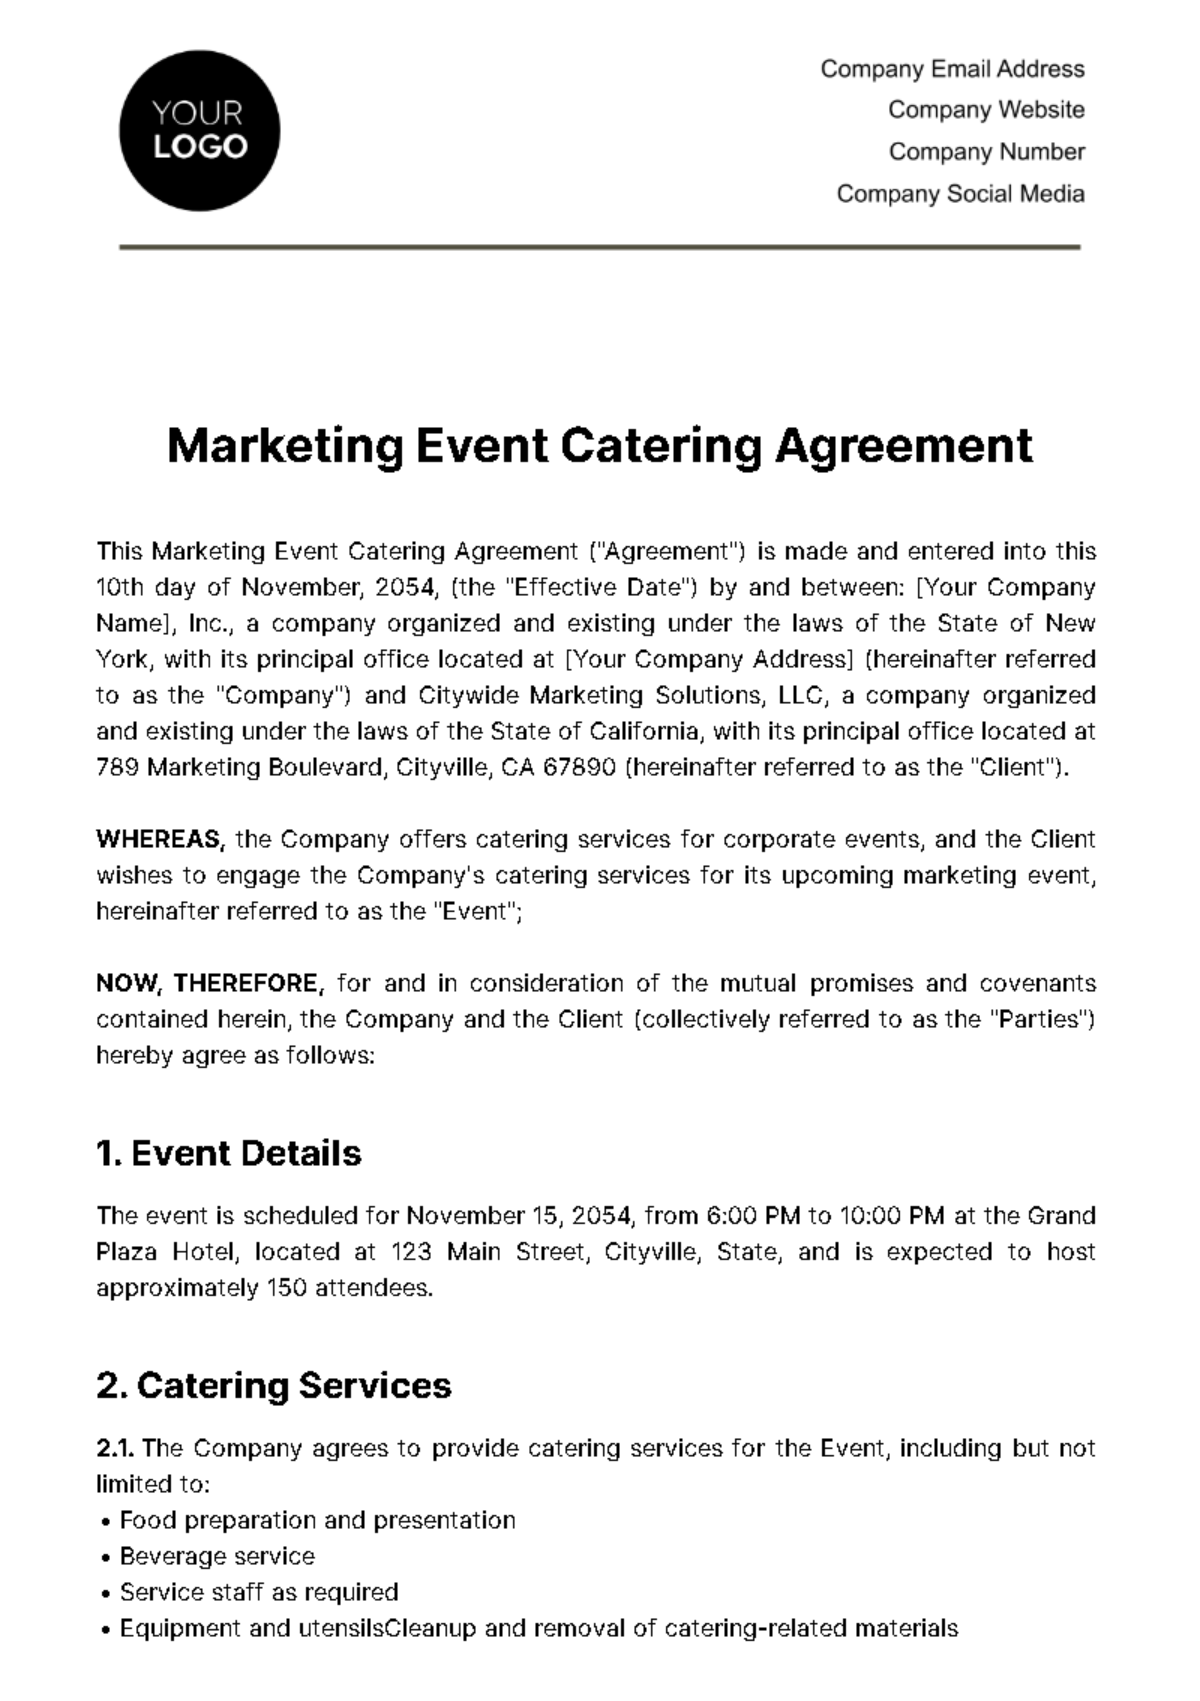 Marketing Event Catering Agreement Template